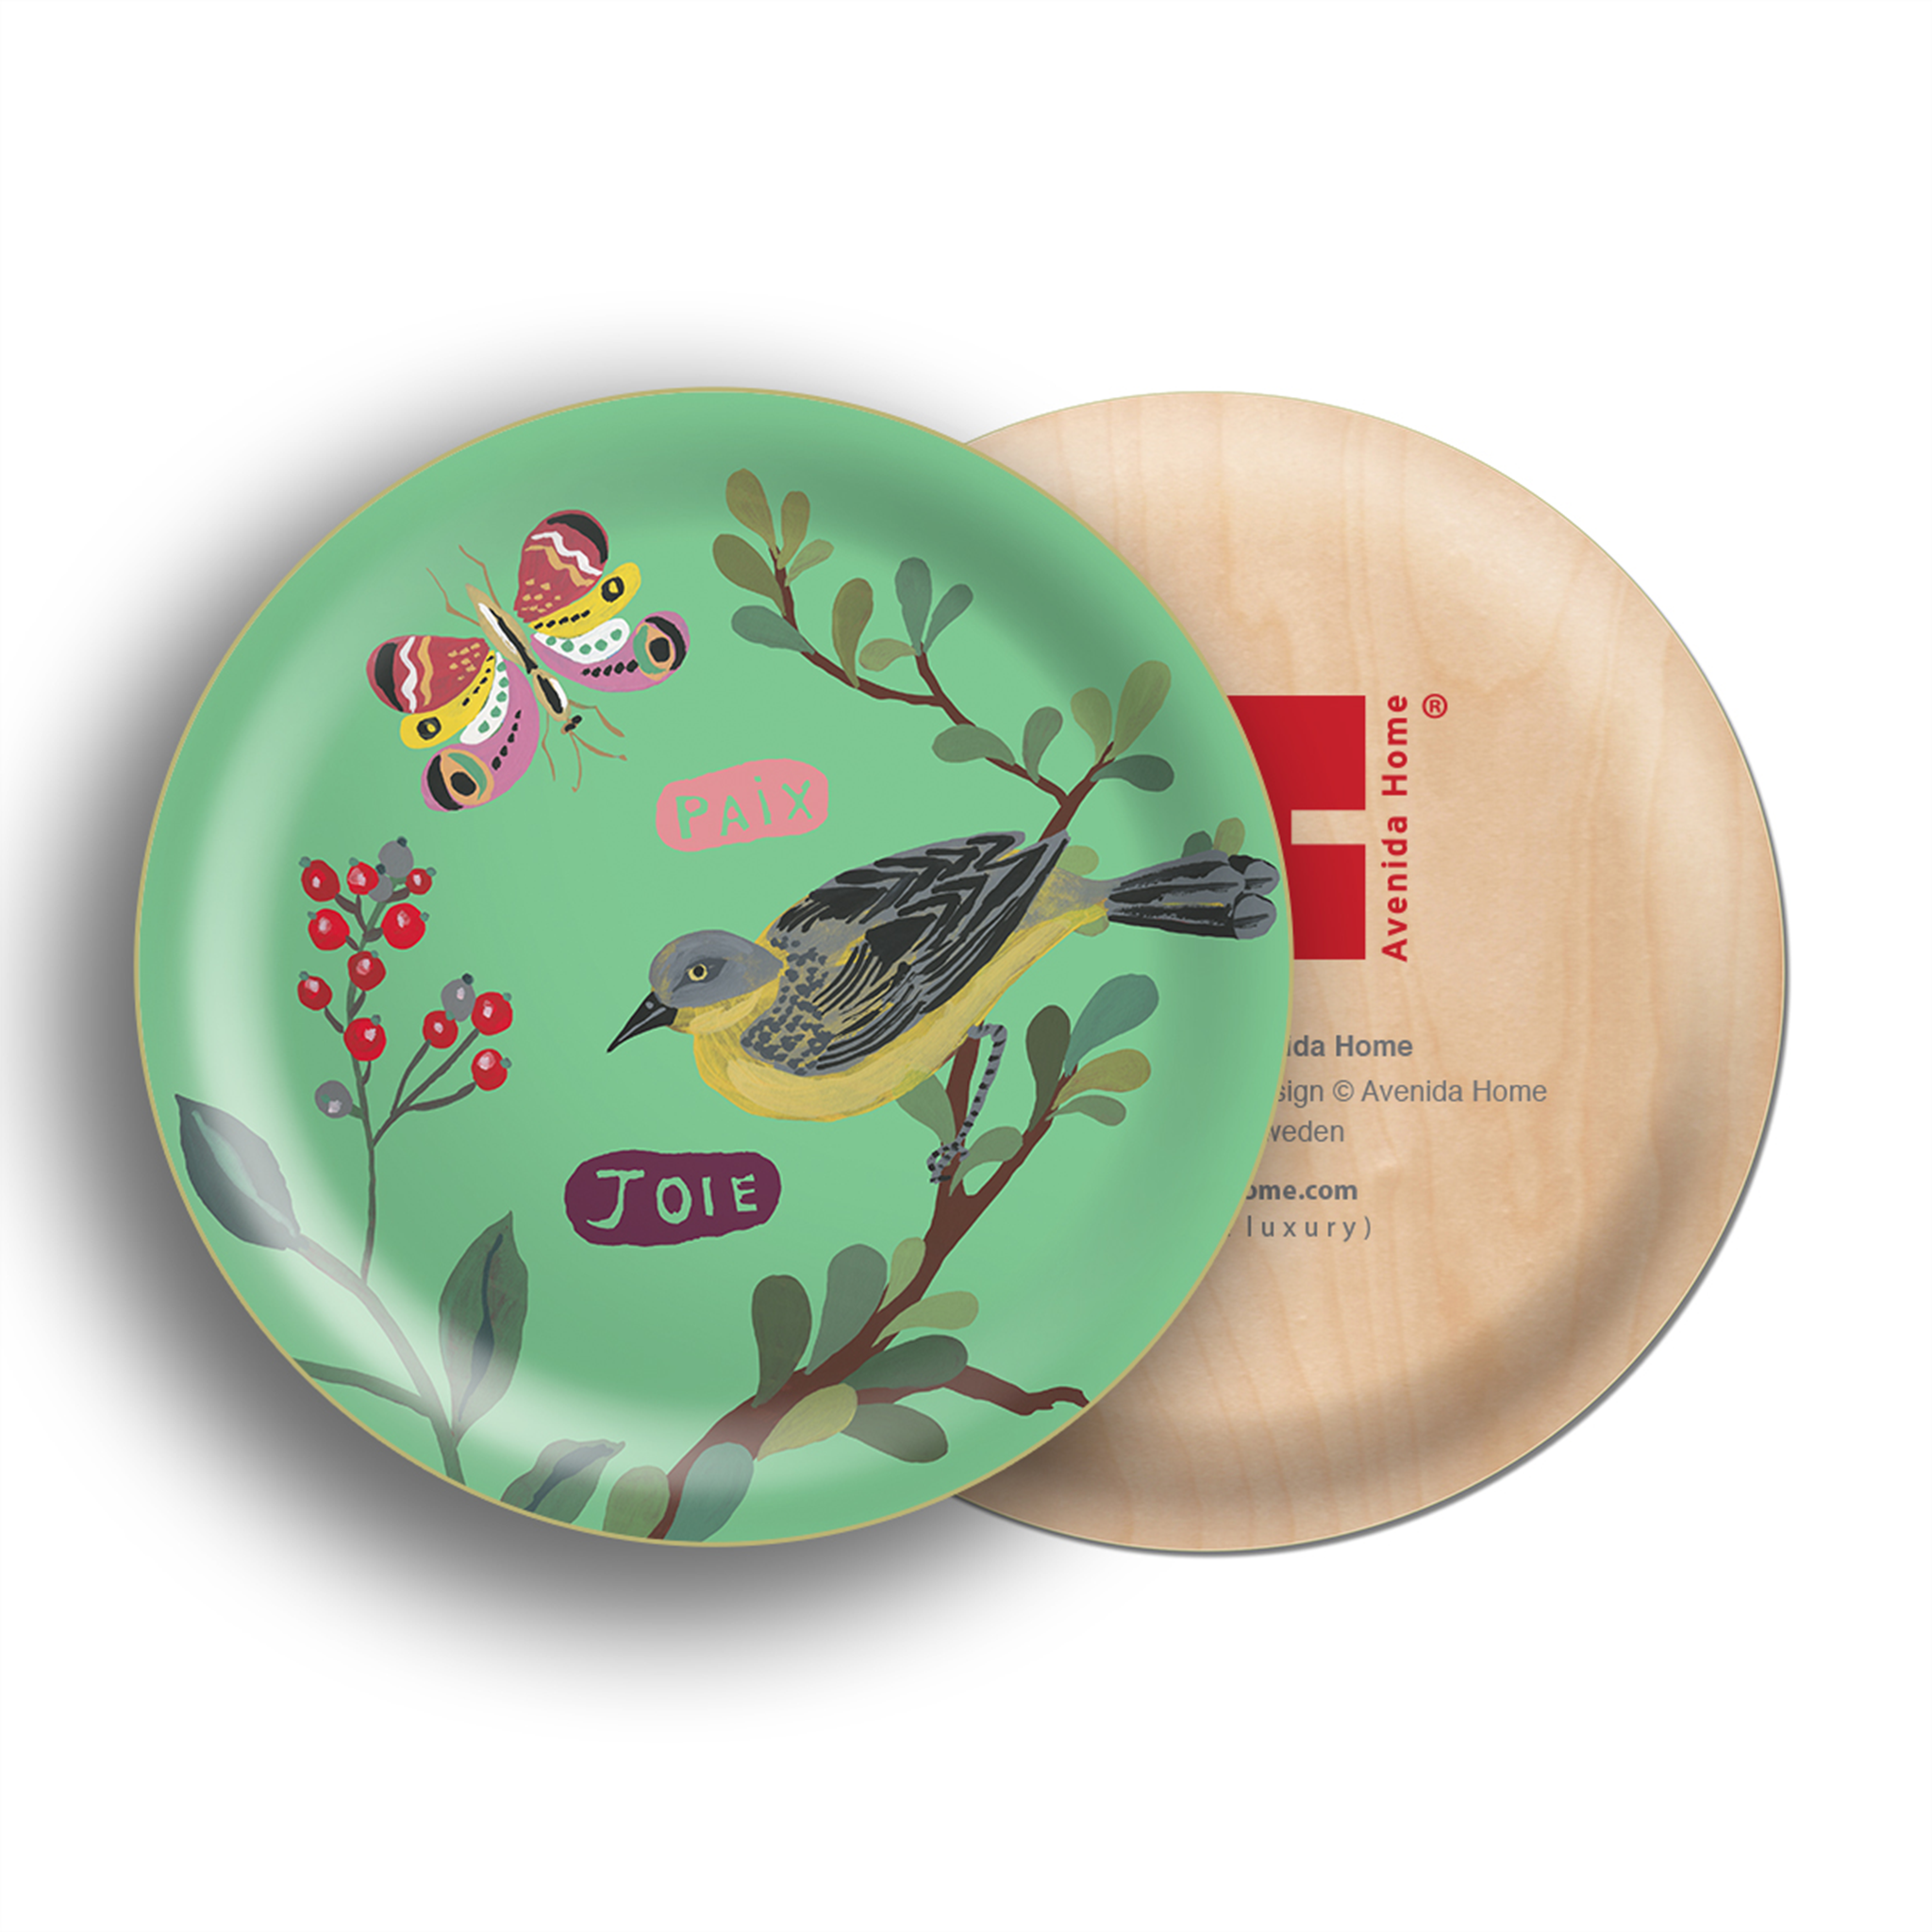 a circular green tray with a stylized yellow and black bird on a branch, red berries, and leaves. Two French words, "PAIX" (peace) and "Joie" (joy), are written in pink and purple, respectively. A colorful butterfly is also present, complementing the tray's design.